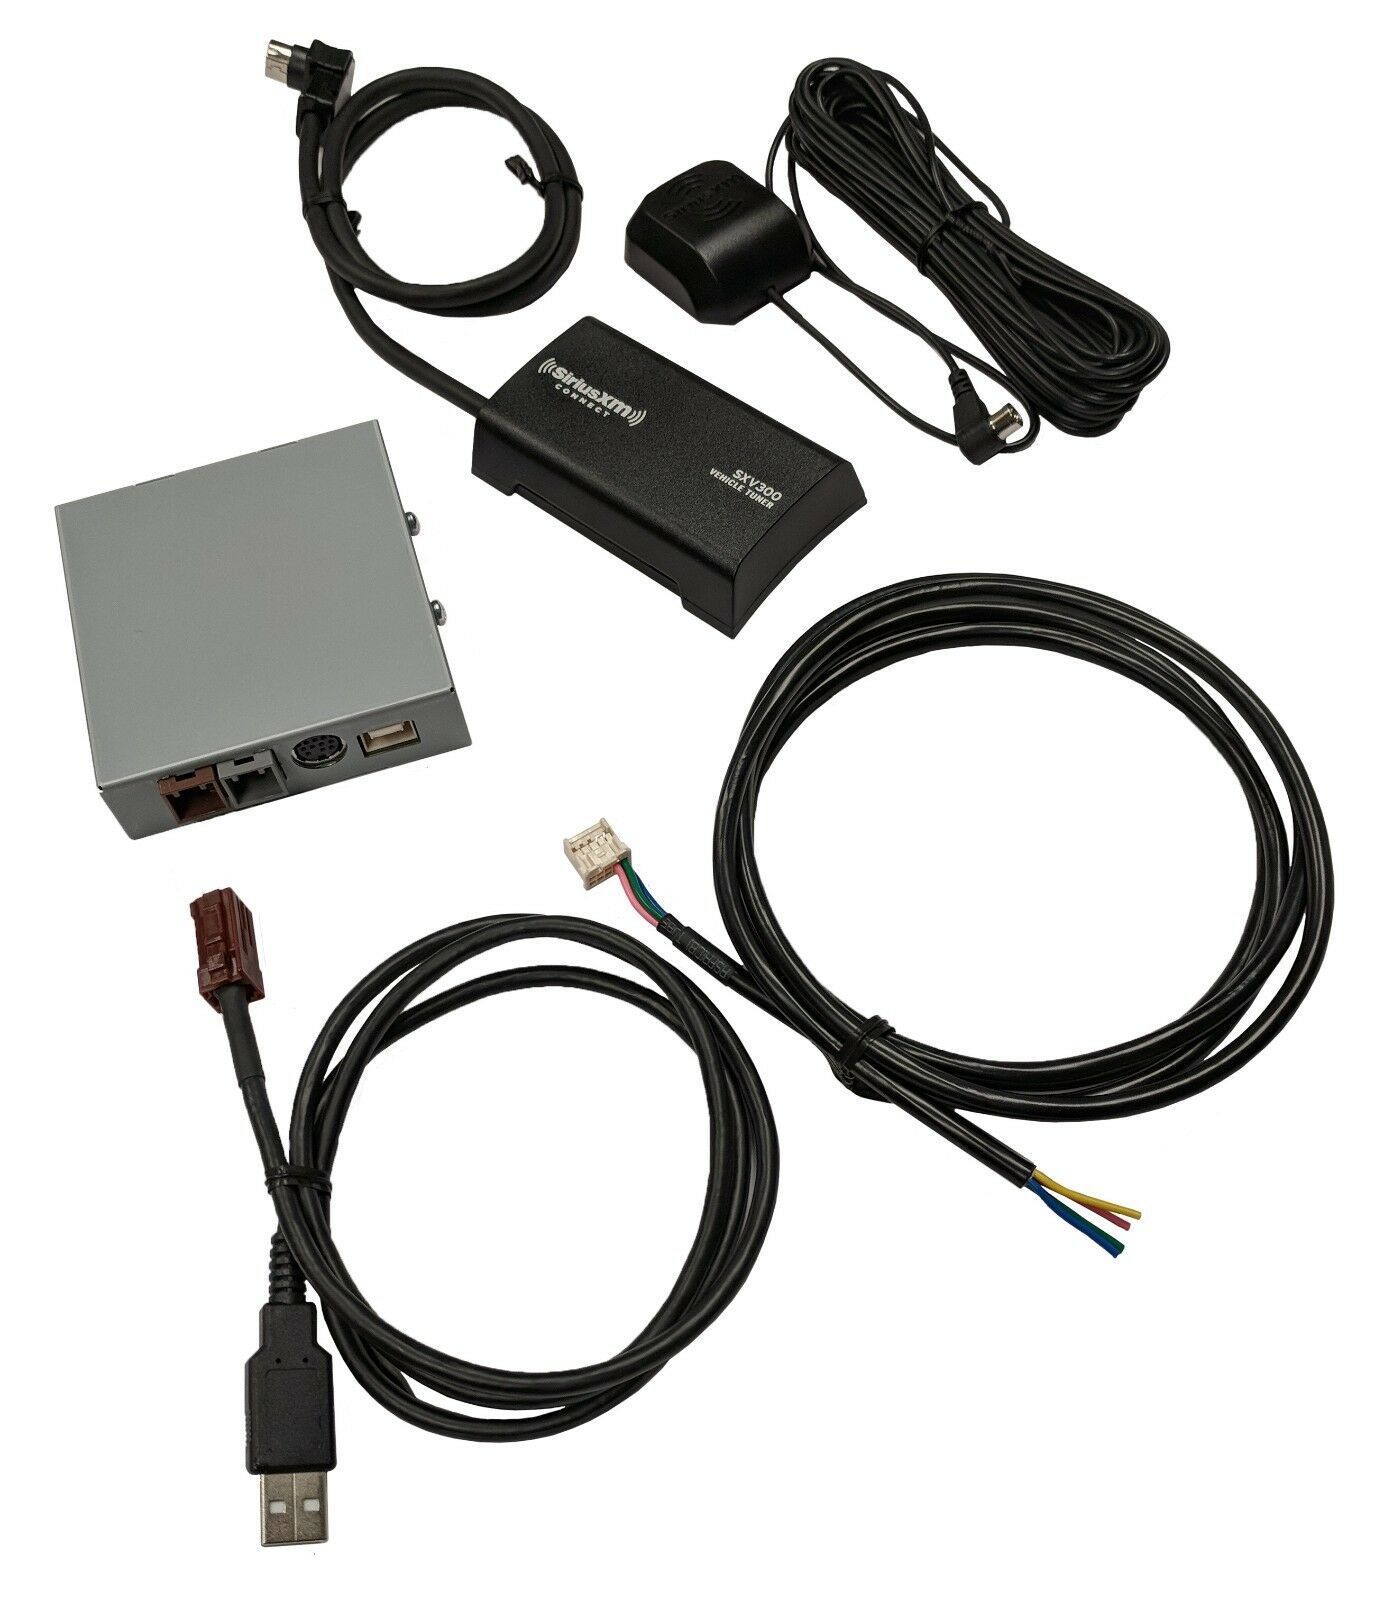 Primary image for SiriusXM satellite radio kit. Display & control from 2018+ Dodge factory stereo